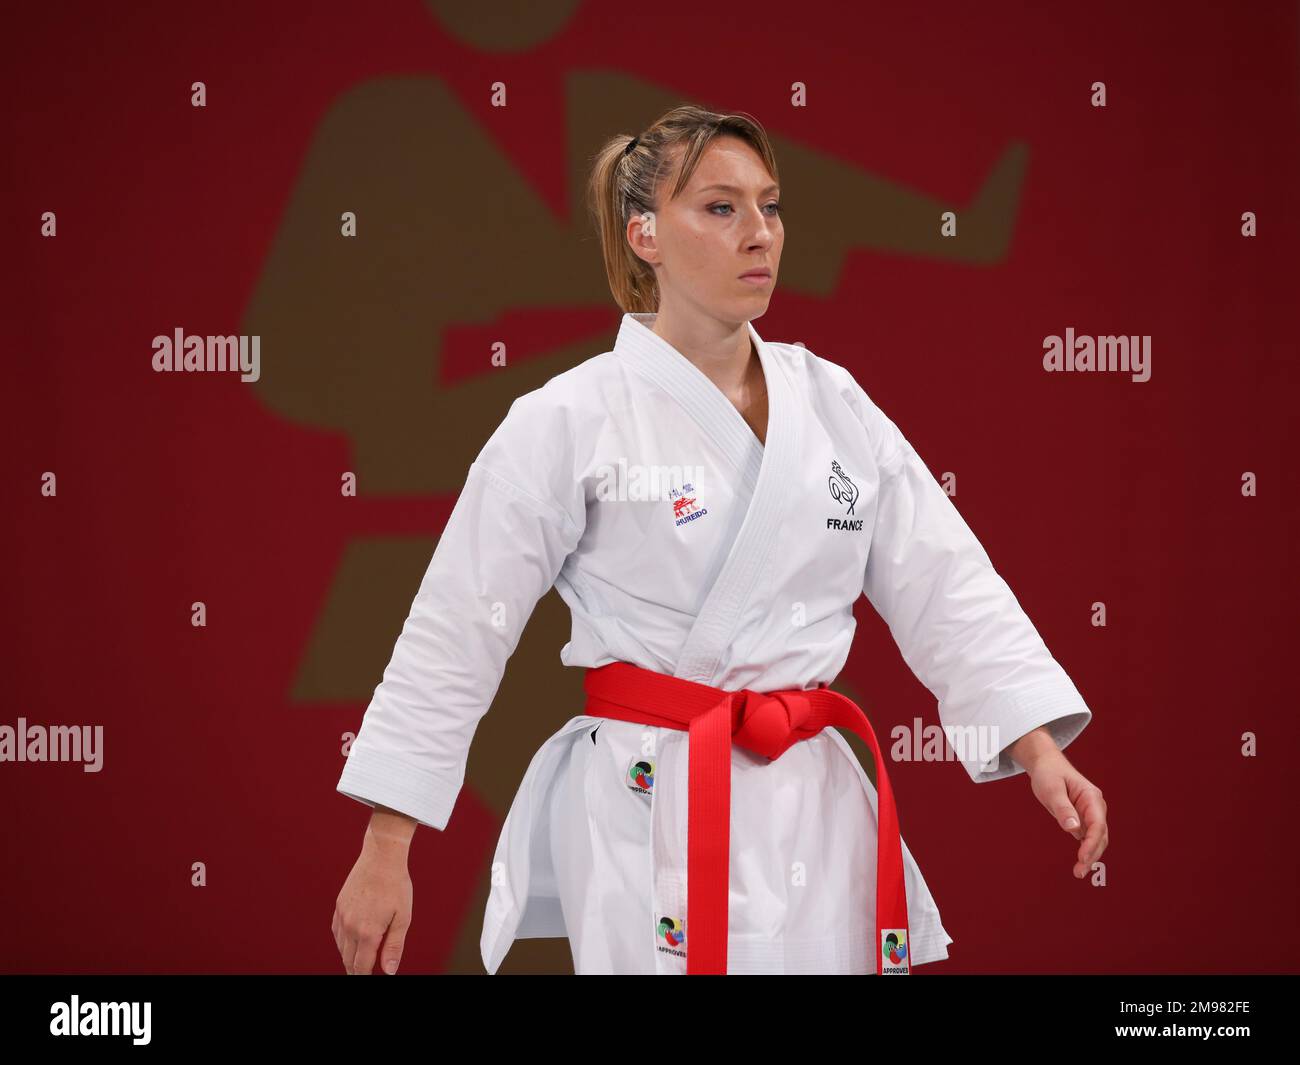 AUG 5, 2021 - TOKYO, JAPAN: Alexandra FERACCI of France competes in the Women's Kata Elimination Round at the Tokyo 2020 Olympic Games (Photo by Mickael Chavet/RX) Stock Photo